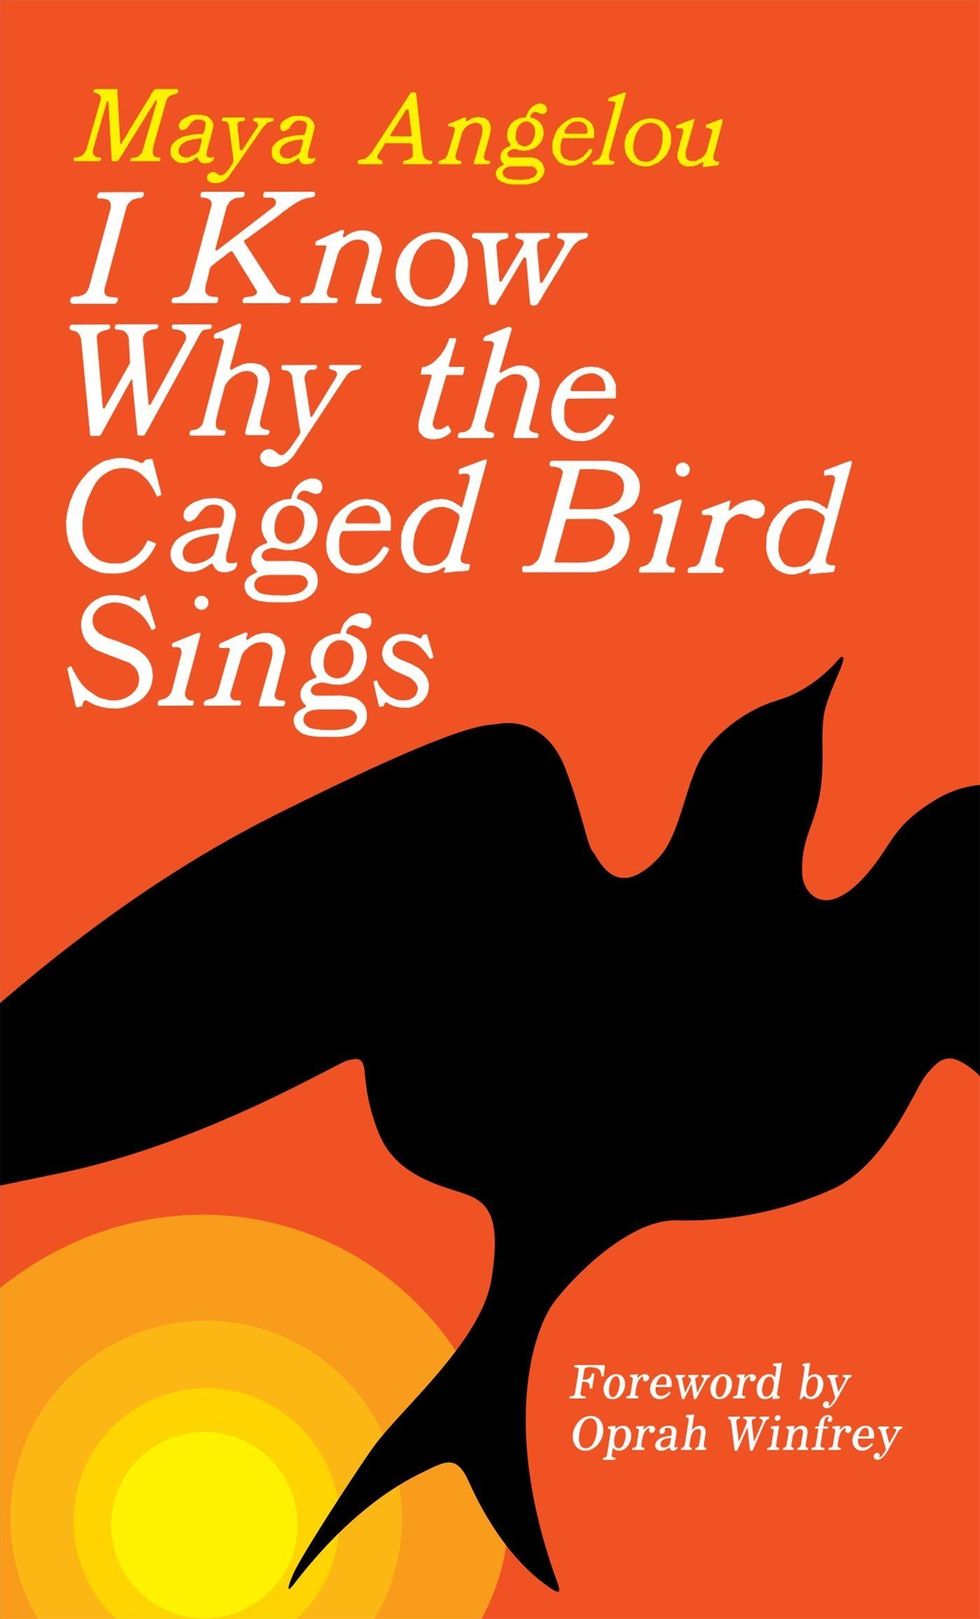 "I Know Why the Caged Bird Sings" (1969)